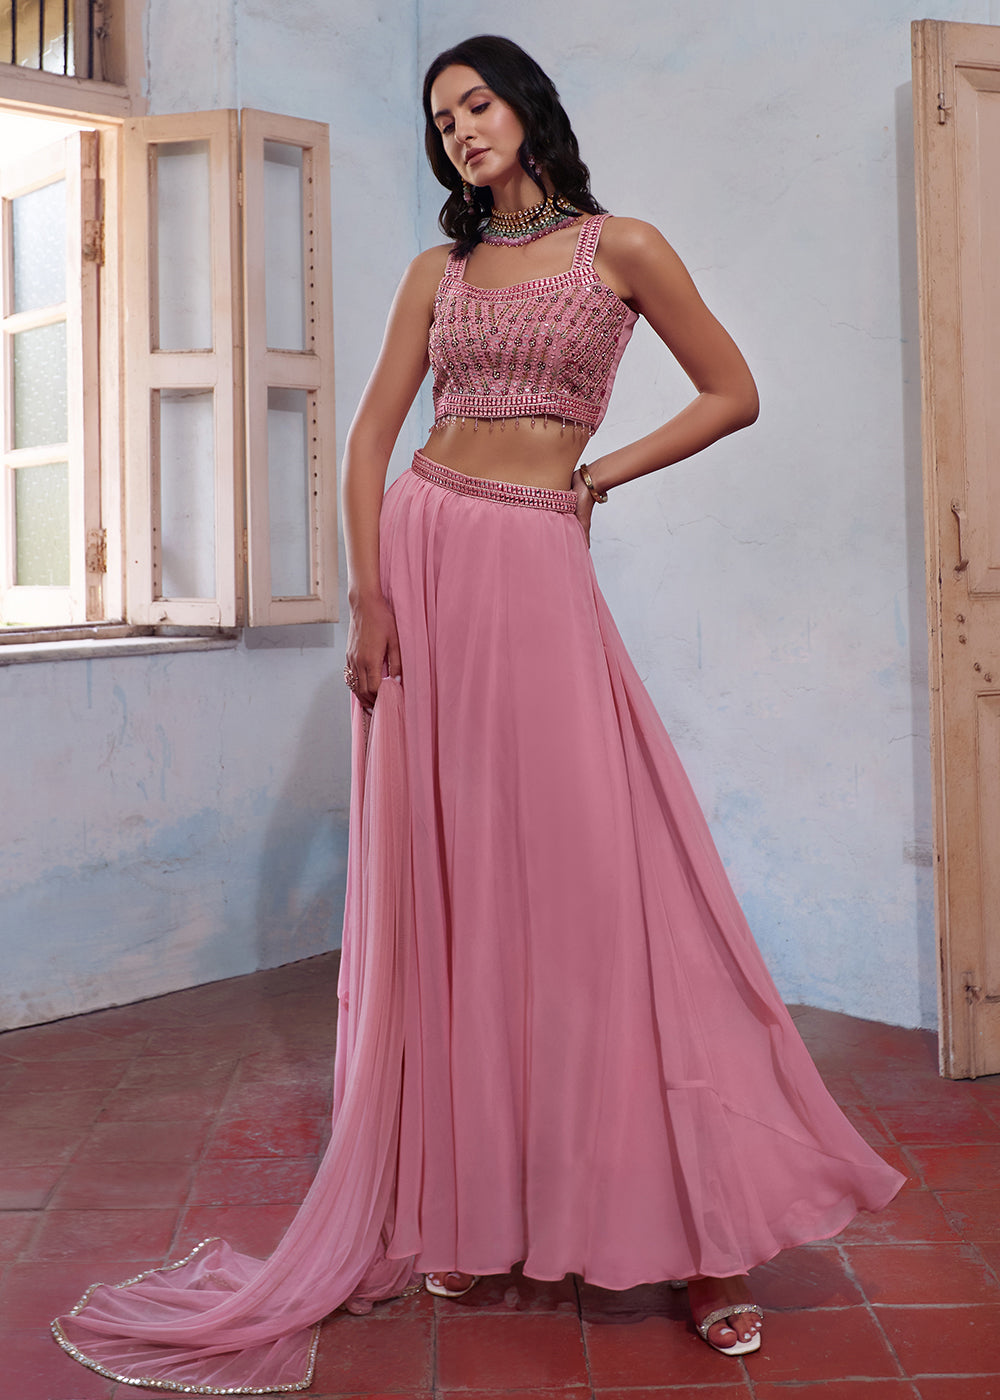 Shop Now Stunning Pink Designer Crop Top Style Sharara Suit Online at Empress Clothing in USA, UK, Canada, Italy & Worldwide. 